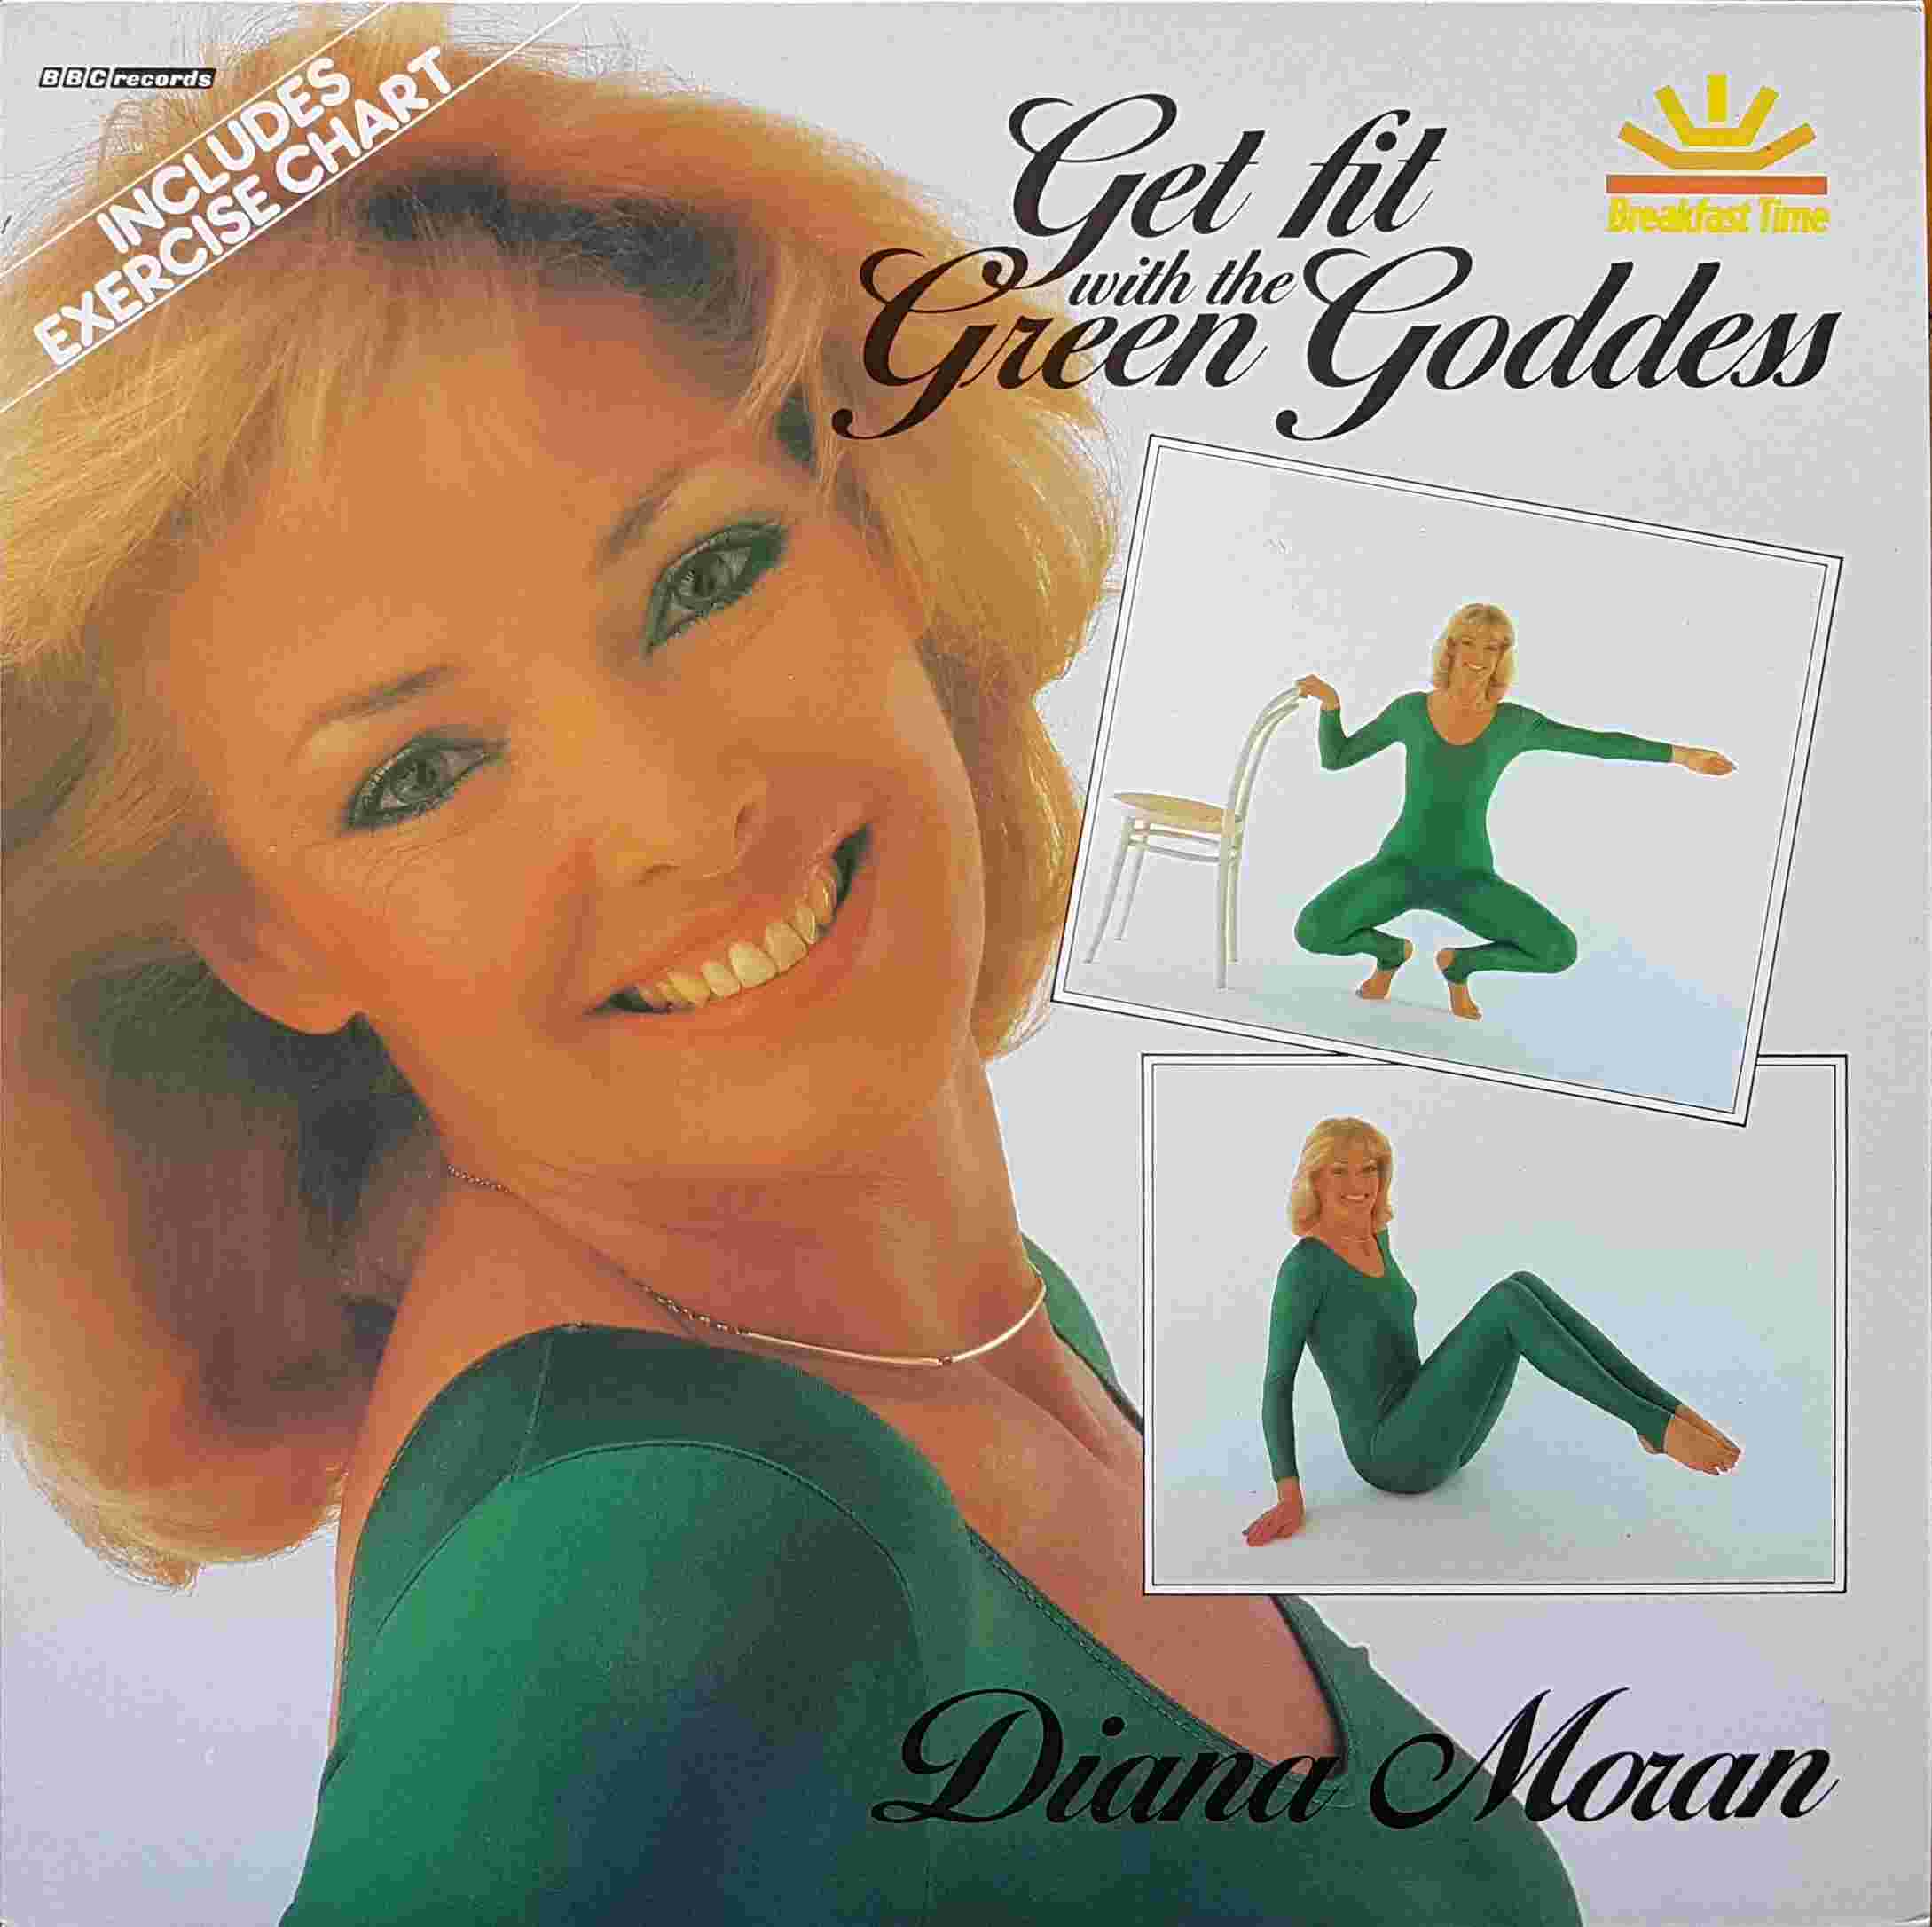 Picture of REH 479 Get fit with the green goddess by artist Diana Moran from the BBC albums - Records and Tapes library